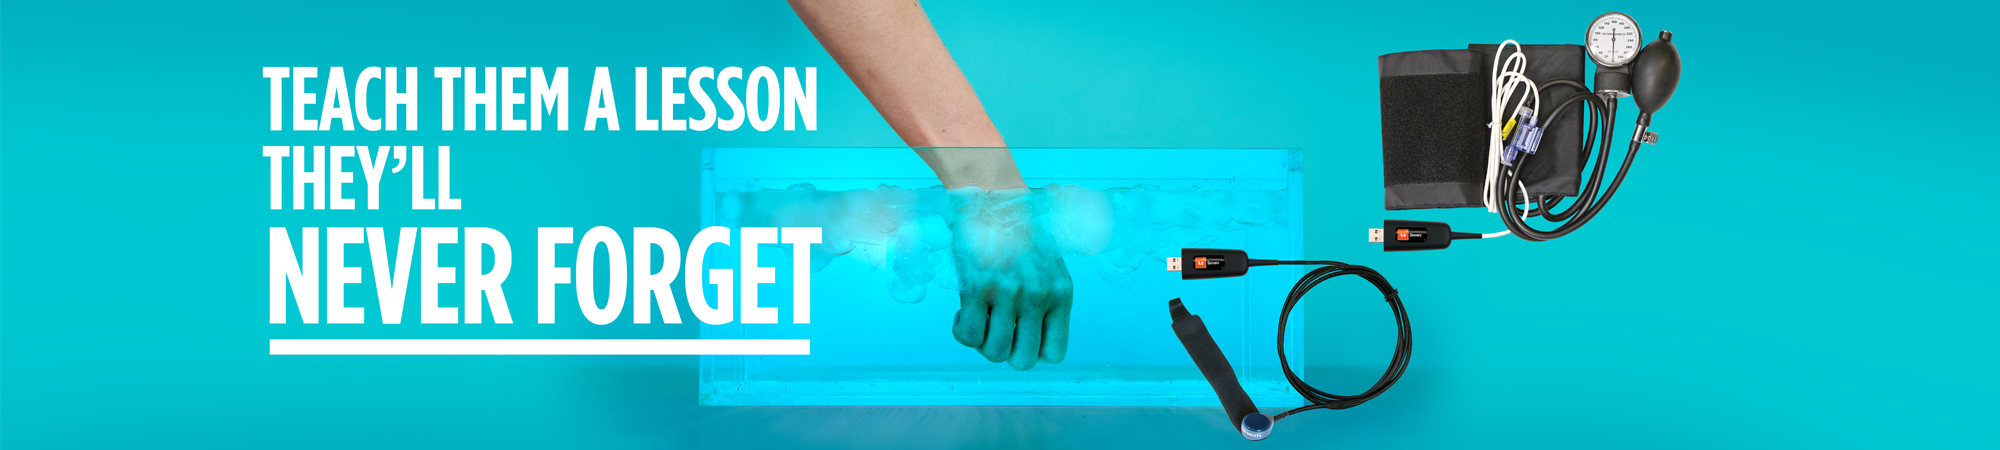 A blue banner that shows a hand submerged in an ice bath, alongside an Lt Sensors Finger Pulse device and Lt Sensors Blood Pressure device. The text on the image reads, "Teach them a lesson they'll never forget".